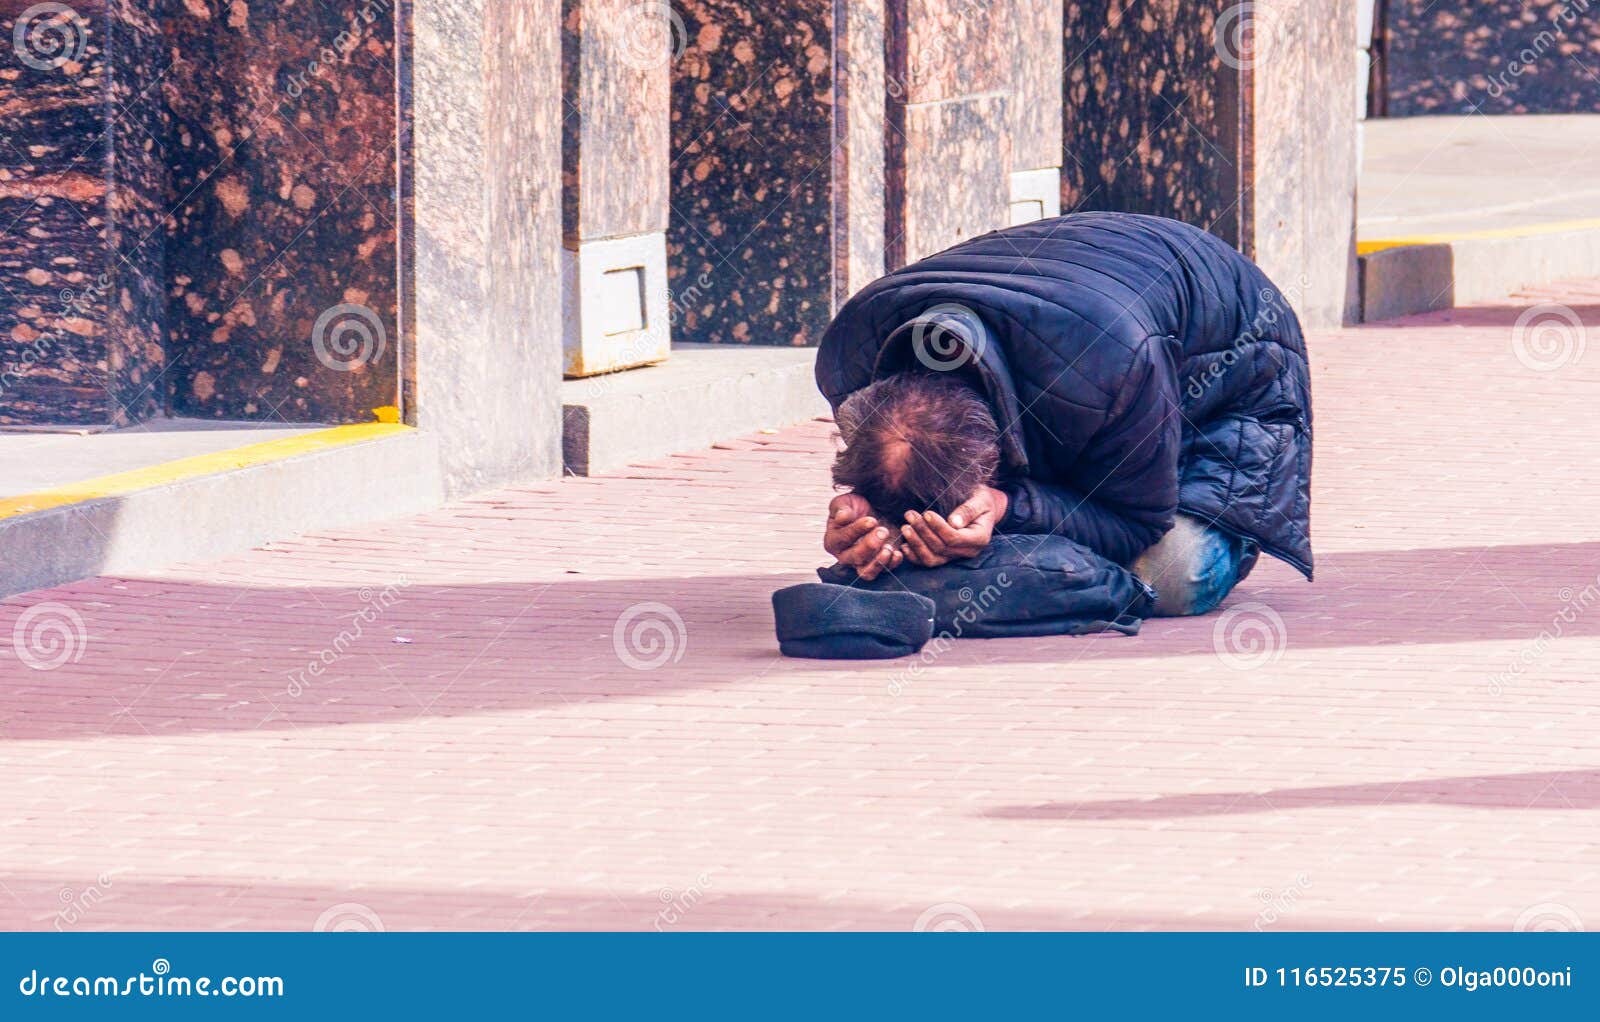 Homeless Vagabond Man Begging People To Donate Some Money Editorial Image - Image of male,